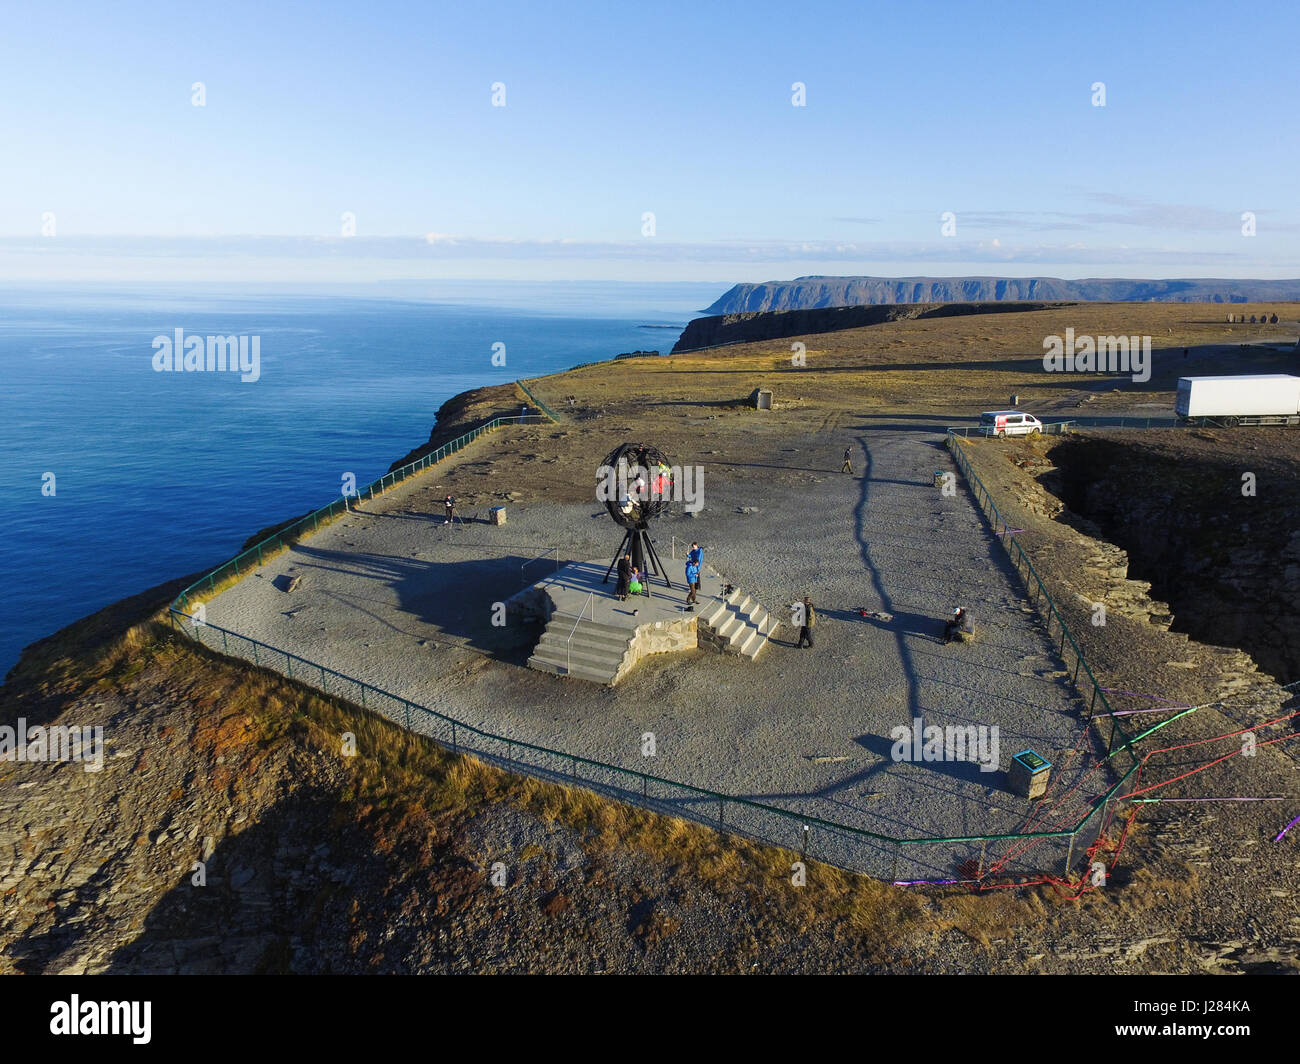 Aerial view of people at the sphere, on a sunny autumn day, in Nordkapp, Norway Stock Photo